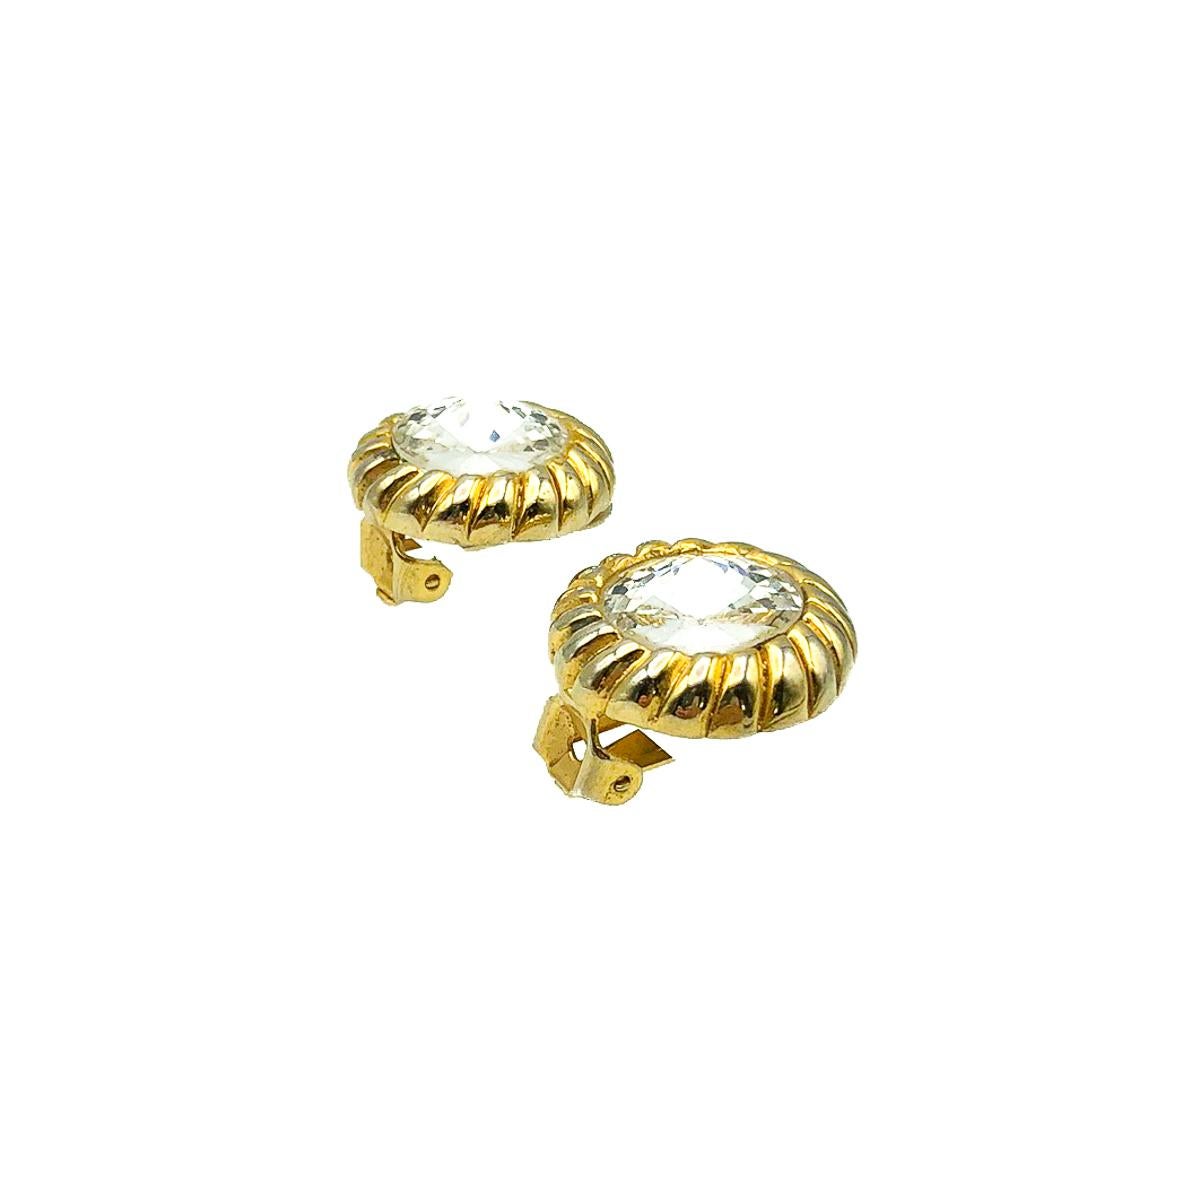 A divine pair of vintage Crystal Rivoli Earrings. Featuring a large clear rivoli crystal within a deep gold edged setting providing a glorious contrast and finish. 
Vintage Condition: Very good without damage or noteworthy wear. 
Materials: Gold